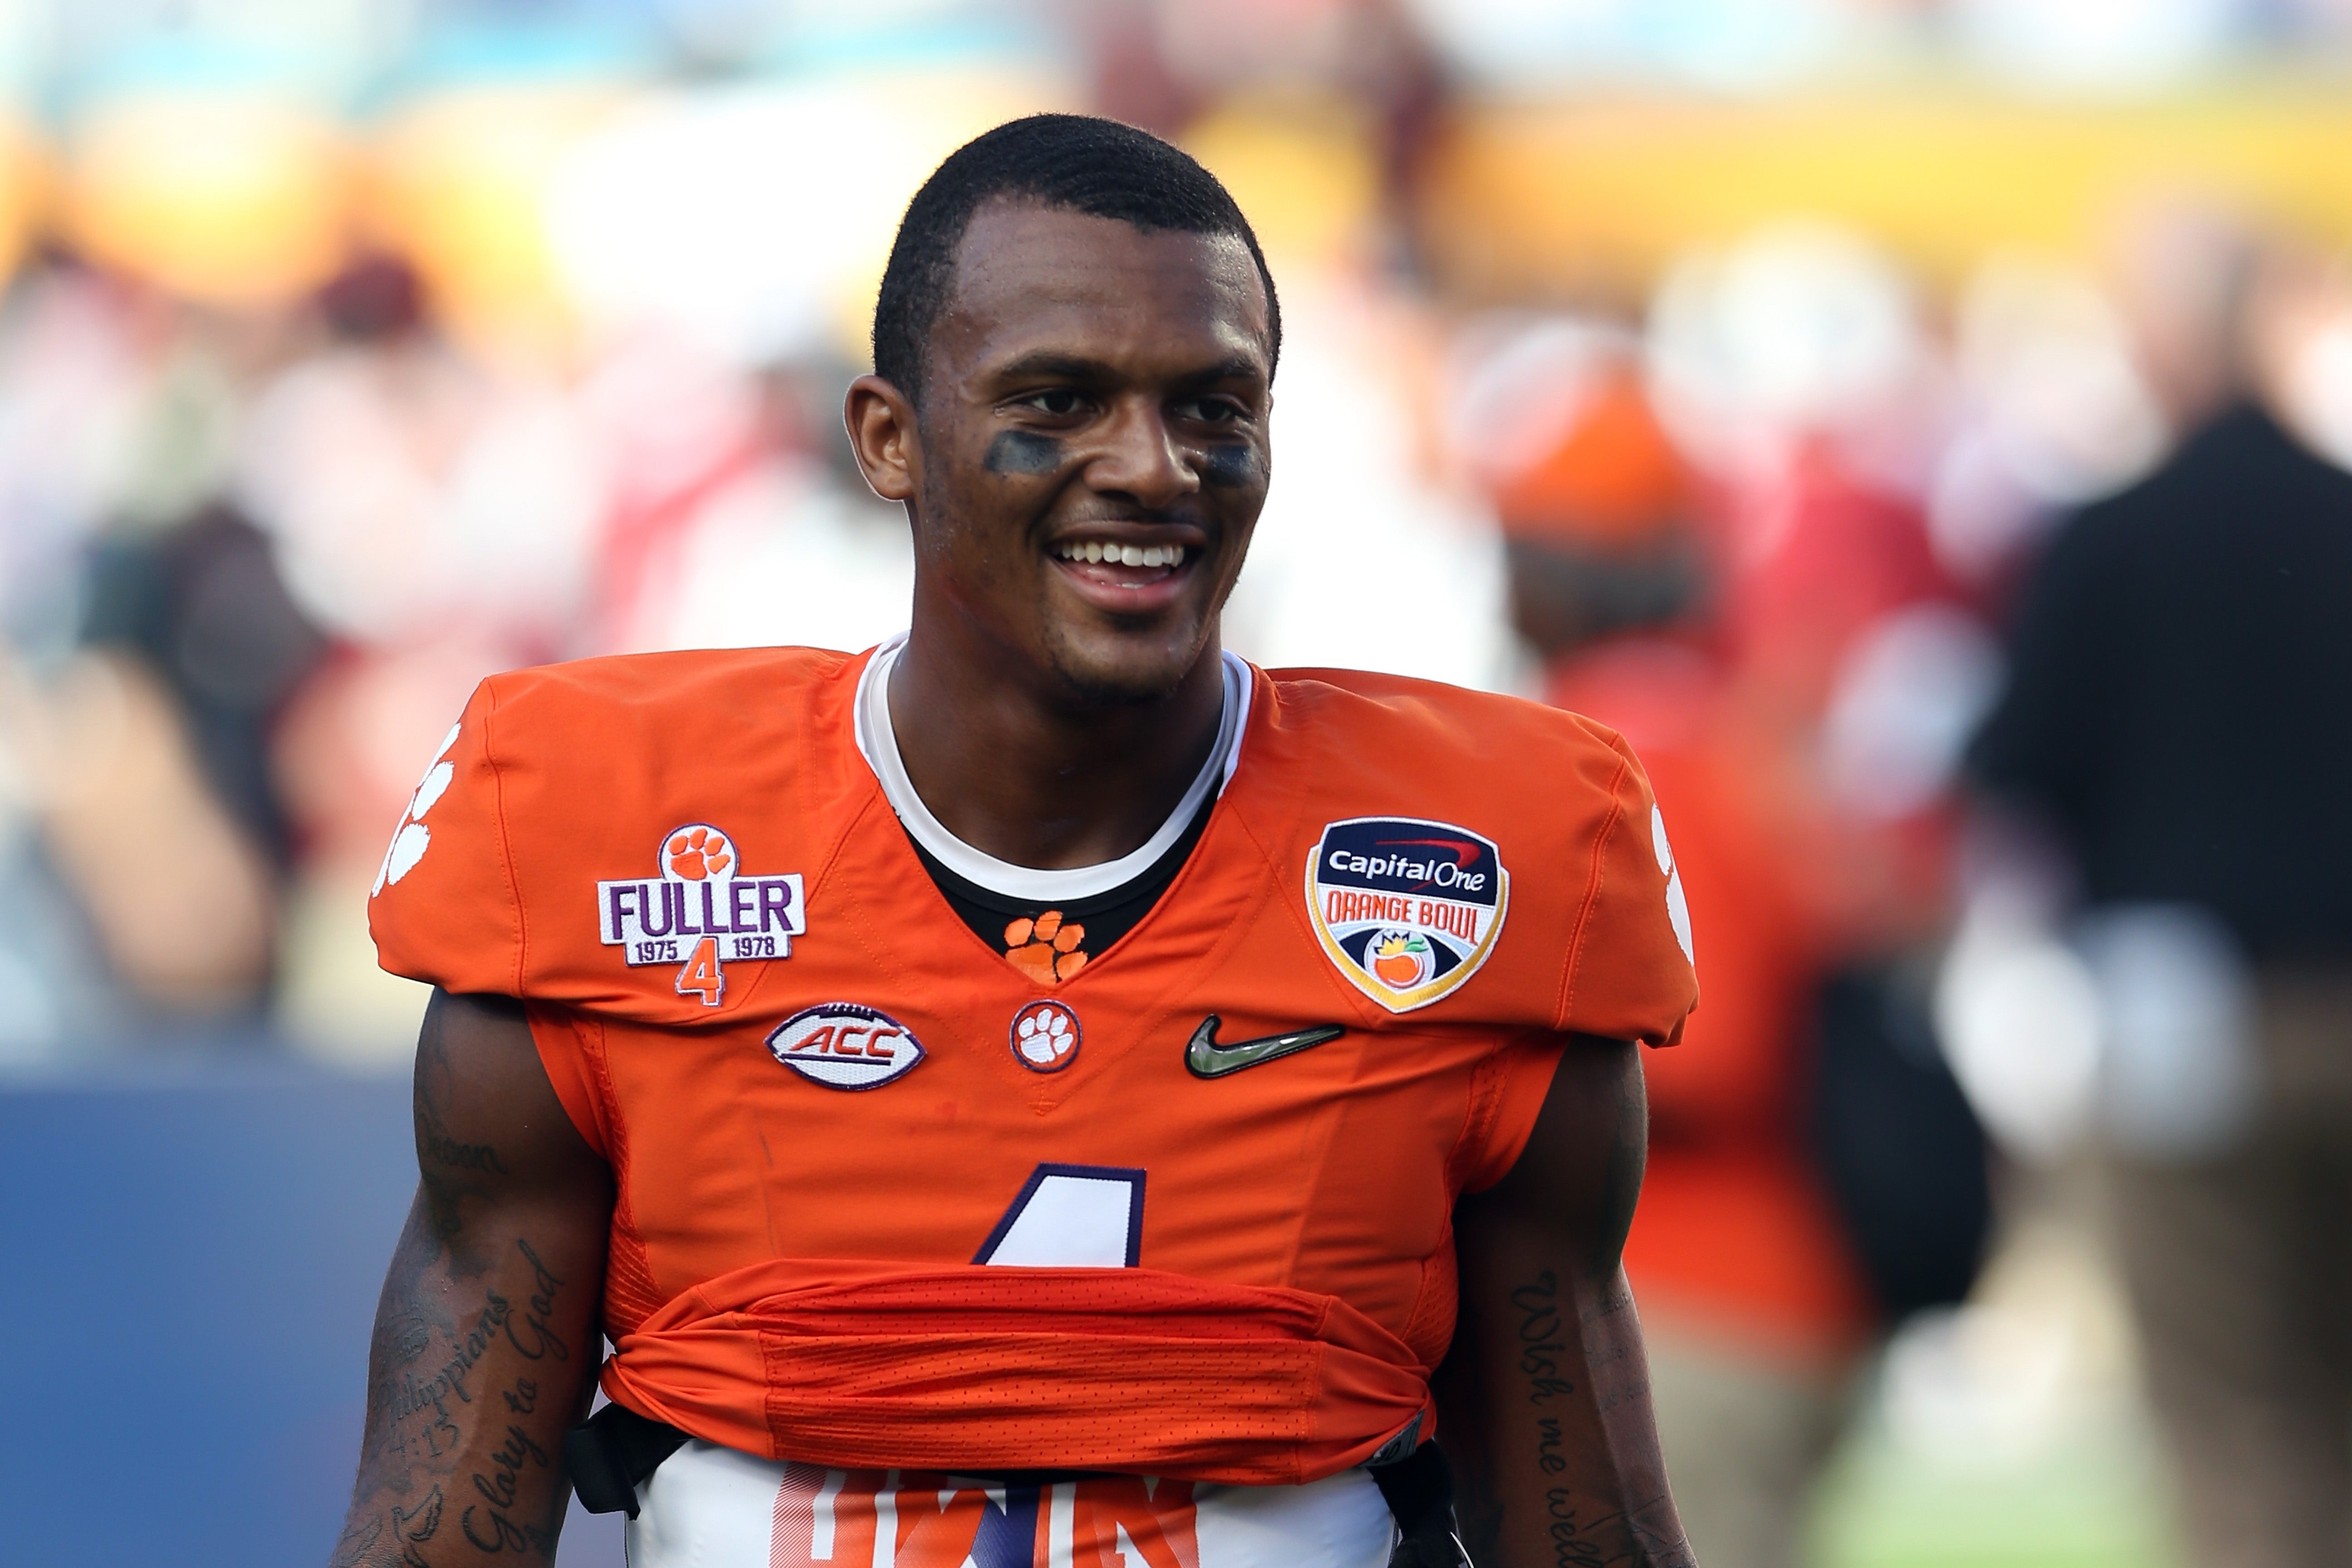 Deshaun Watson Says 'Code Words' for Black Athletes are Alive and Well
